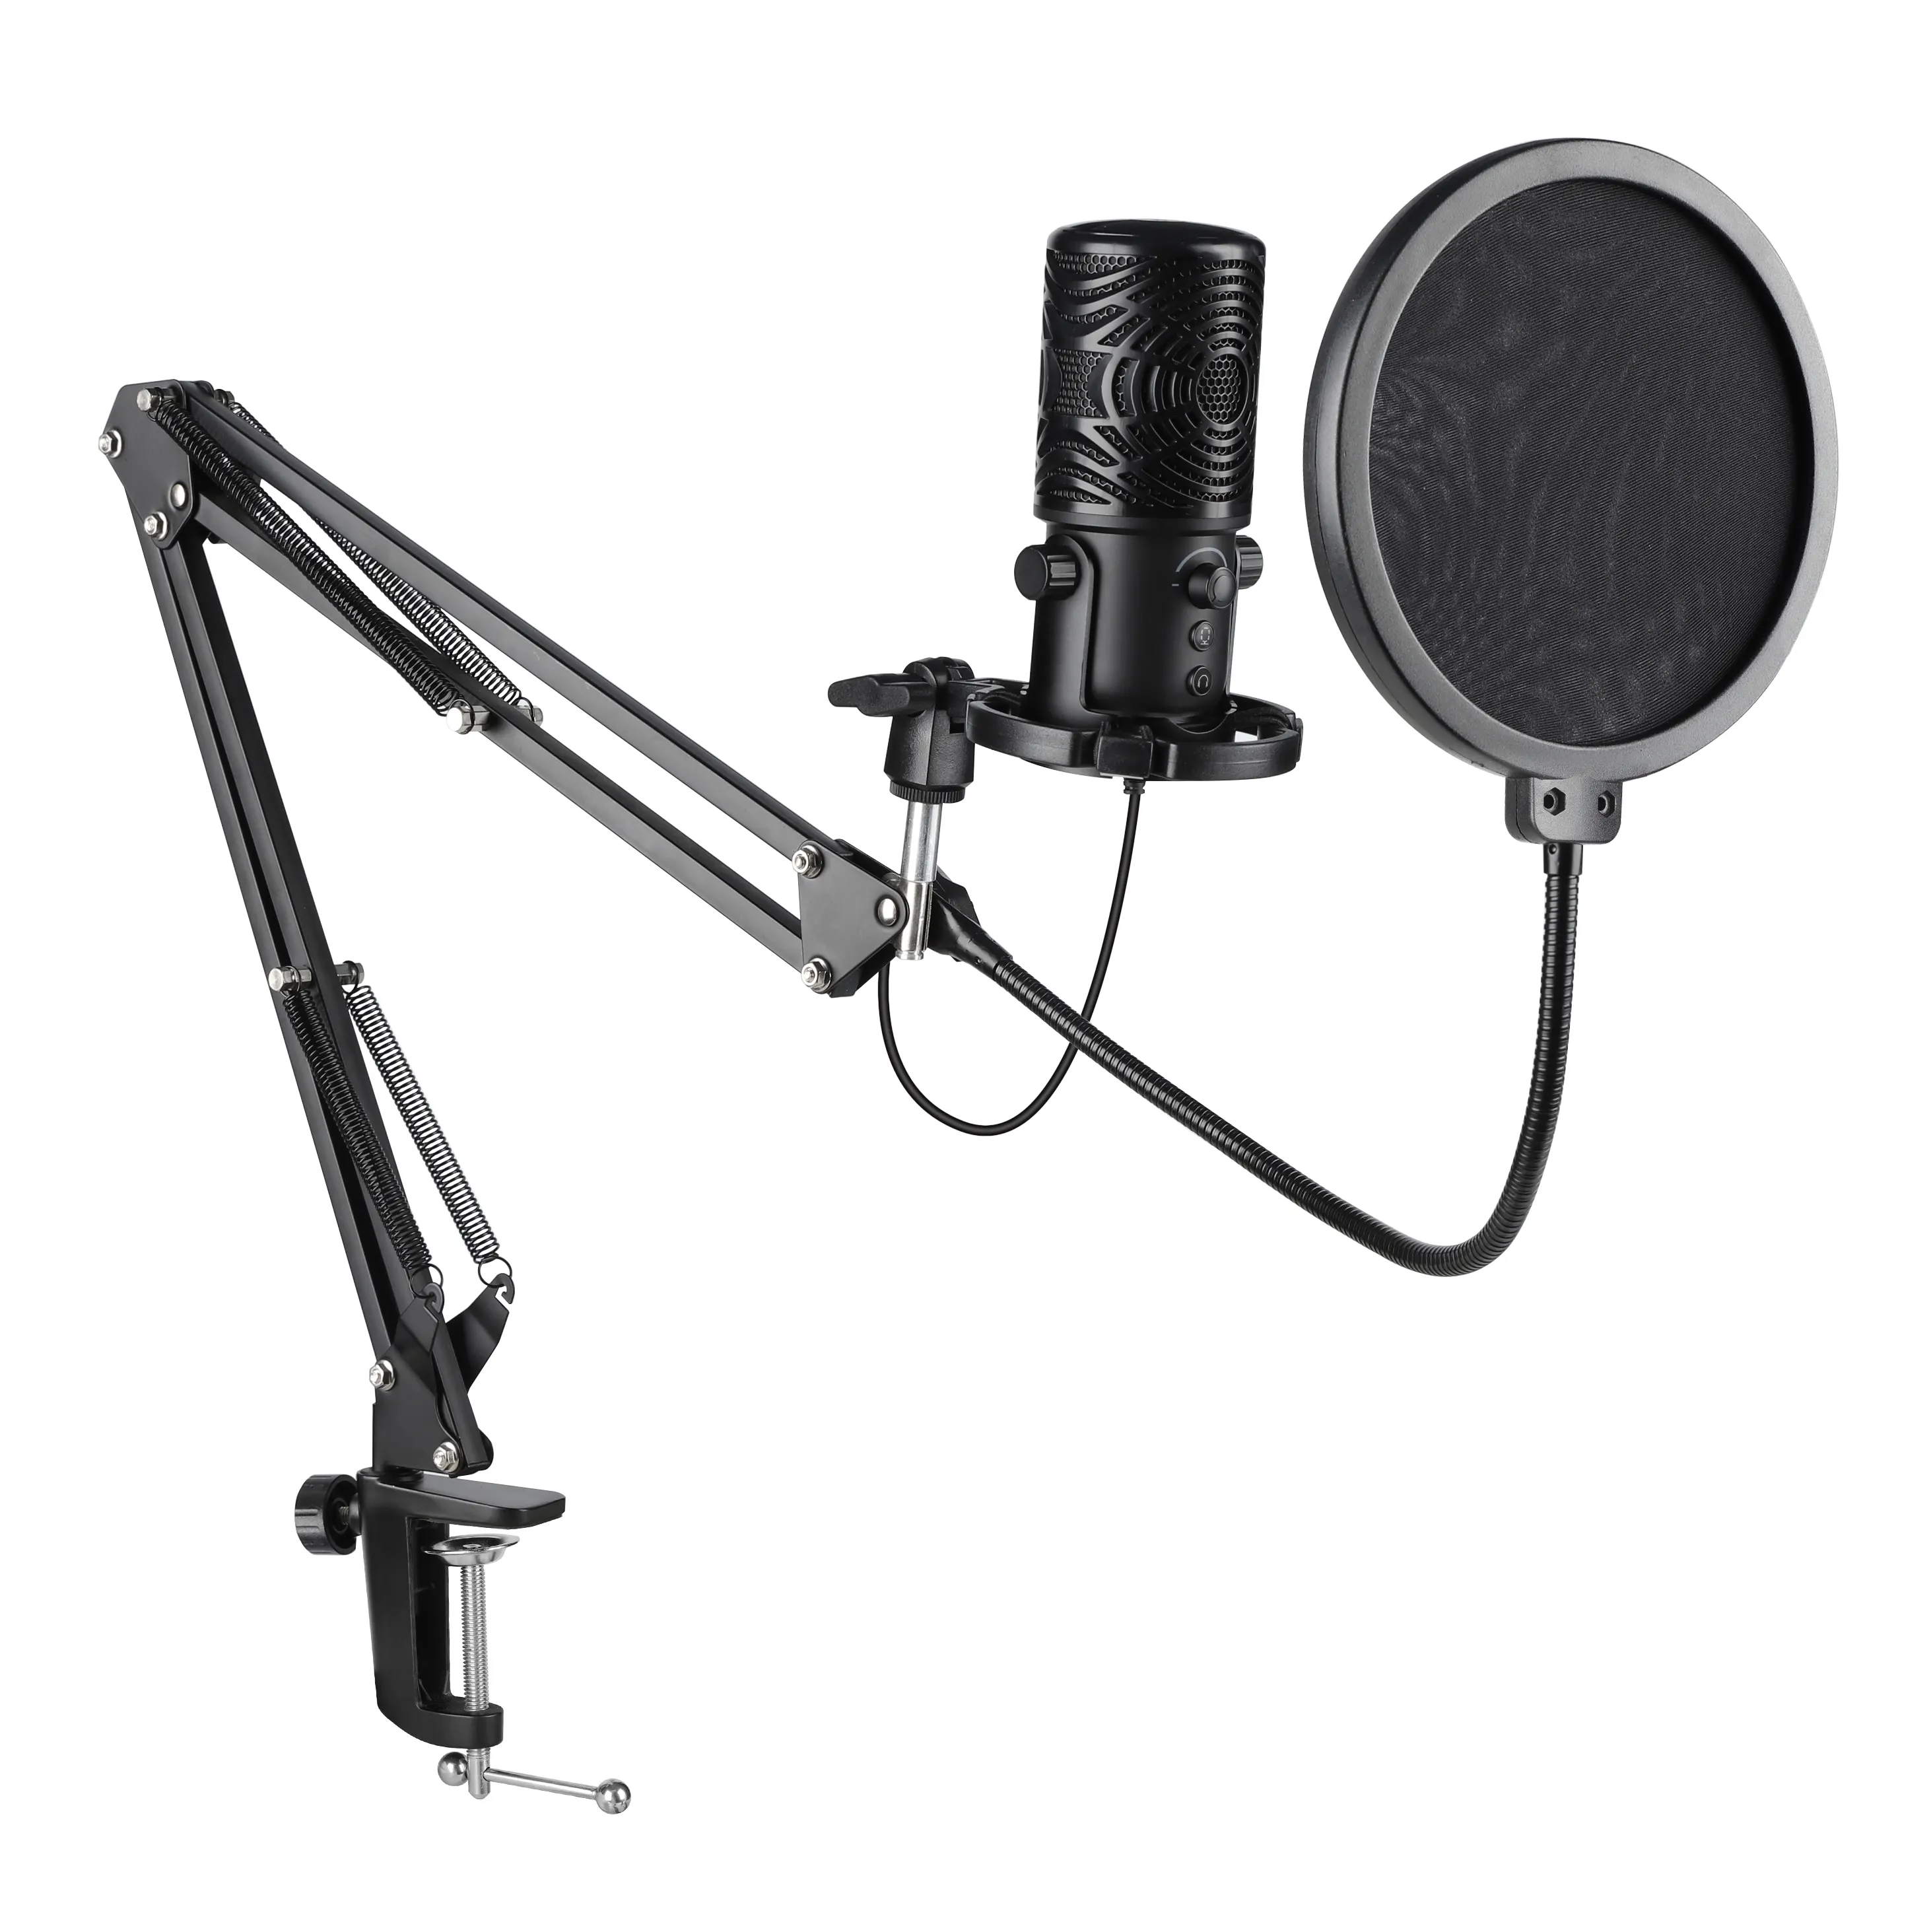 OneOdio FM1 T Full Set Professional USB Condenser Microphone Recording gaming Microphone With Clear Sound